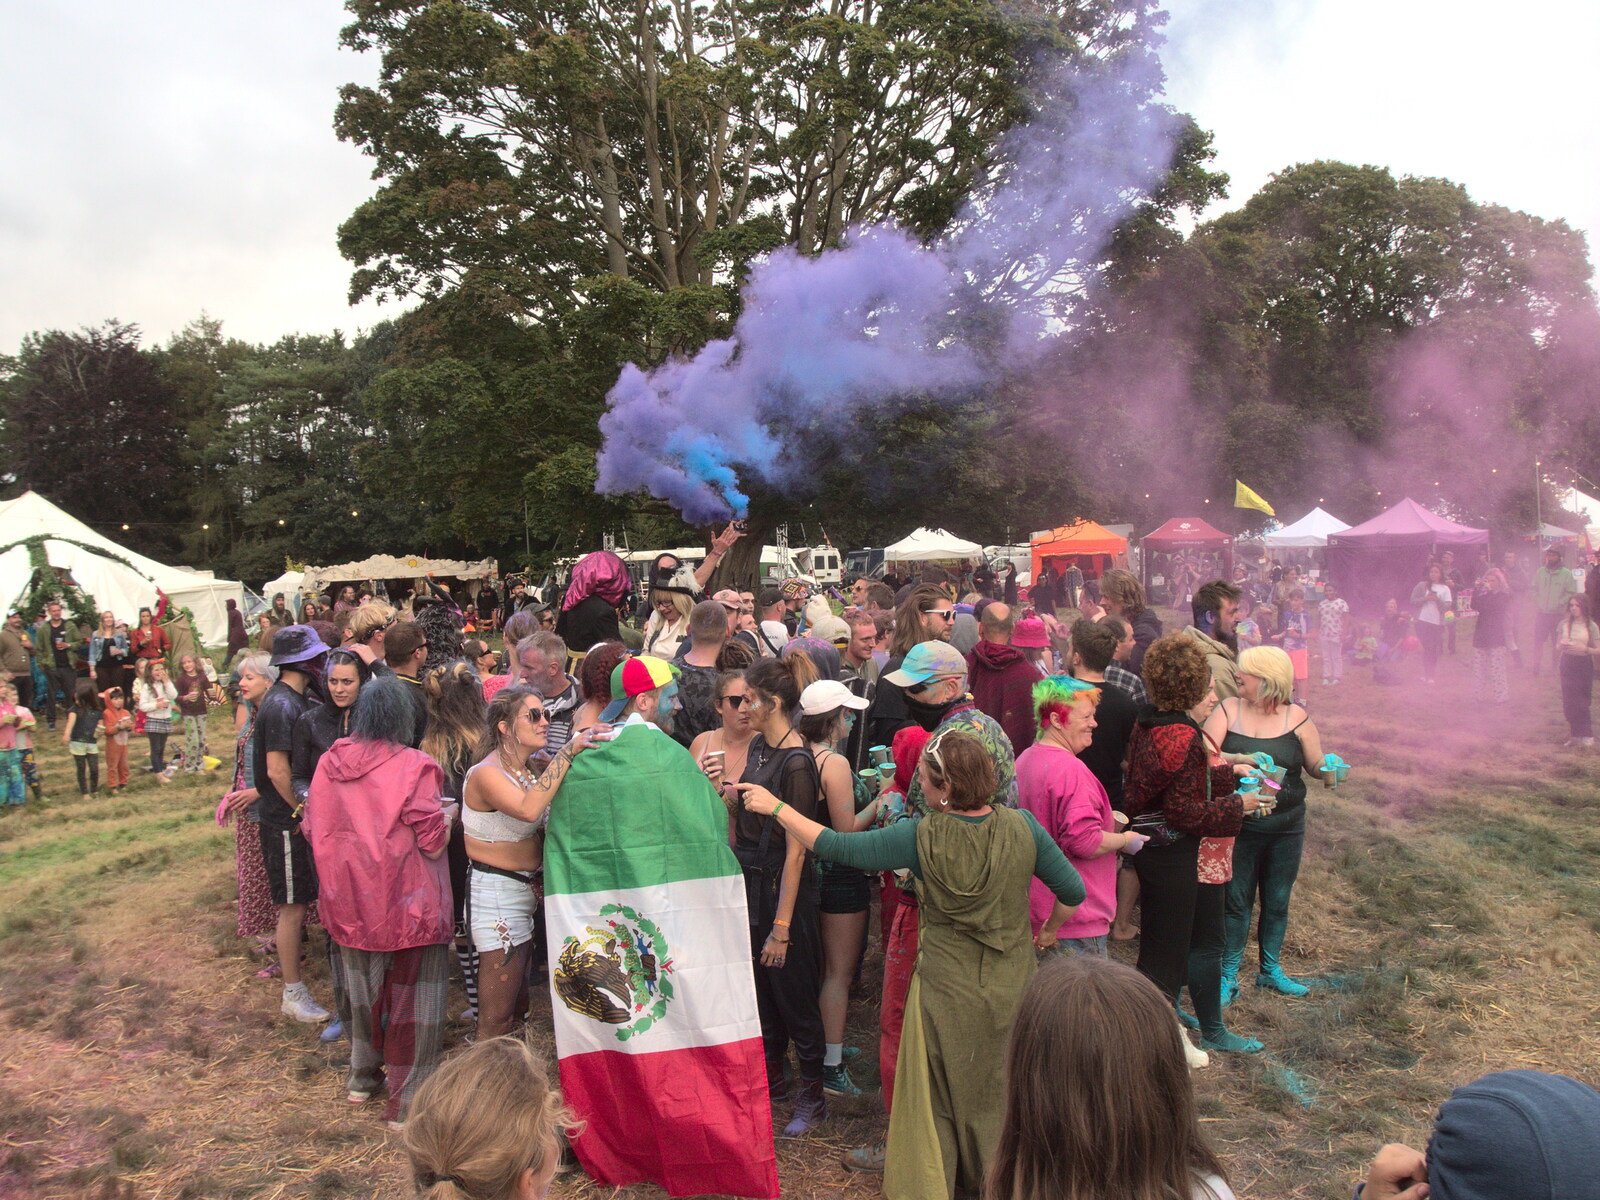 The paint fight starts from Maui Waui Festival, Hill Farm, Gressenhall, Norfolk - 28th August 2021